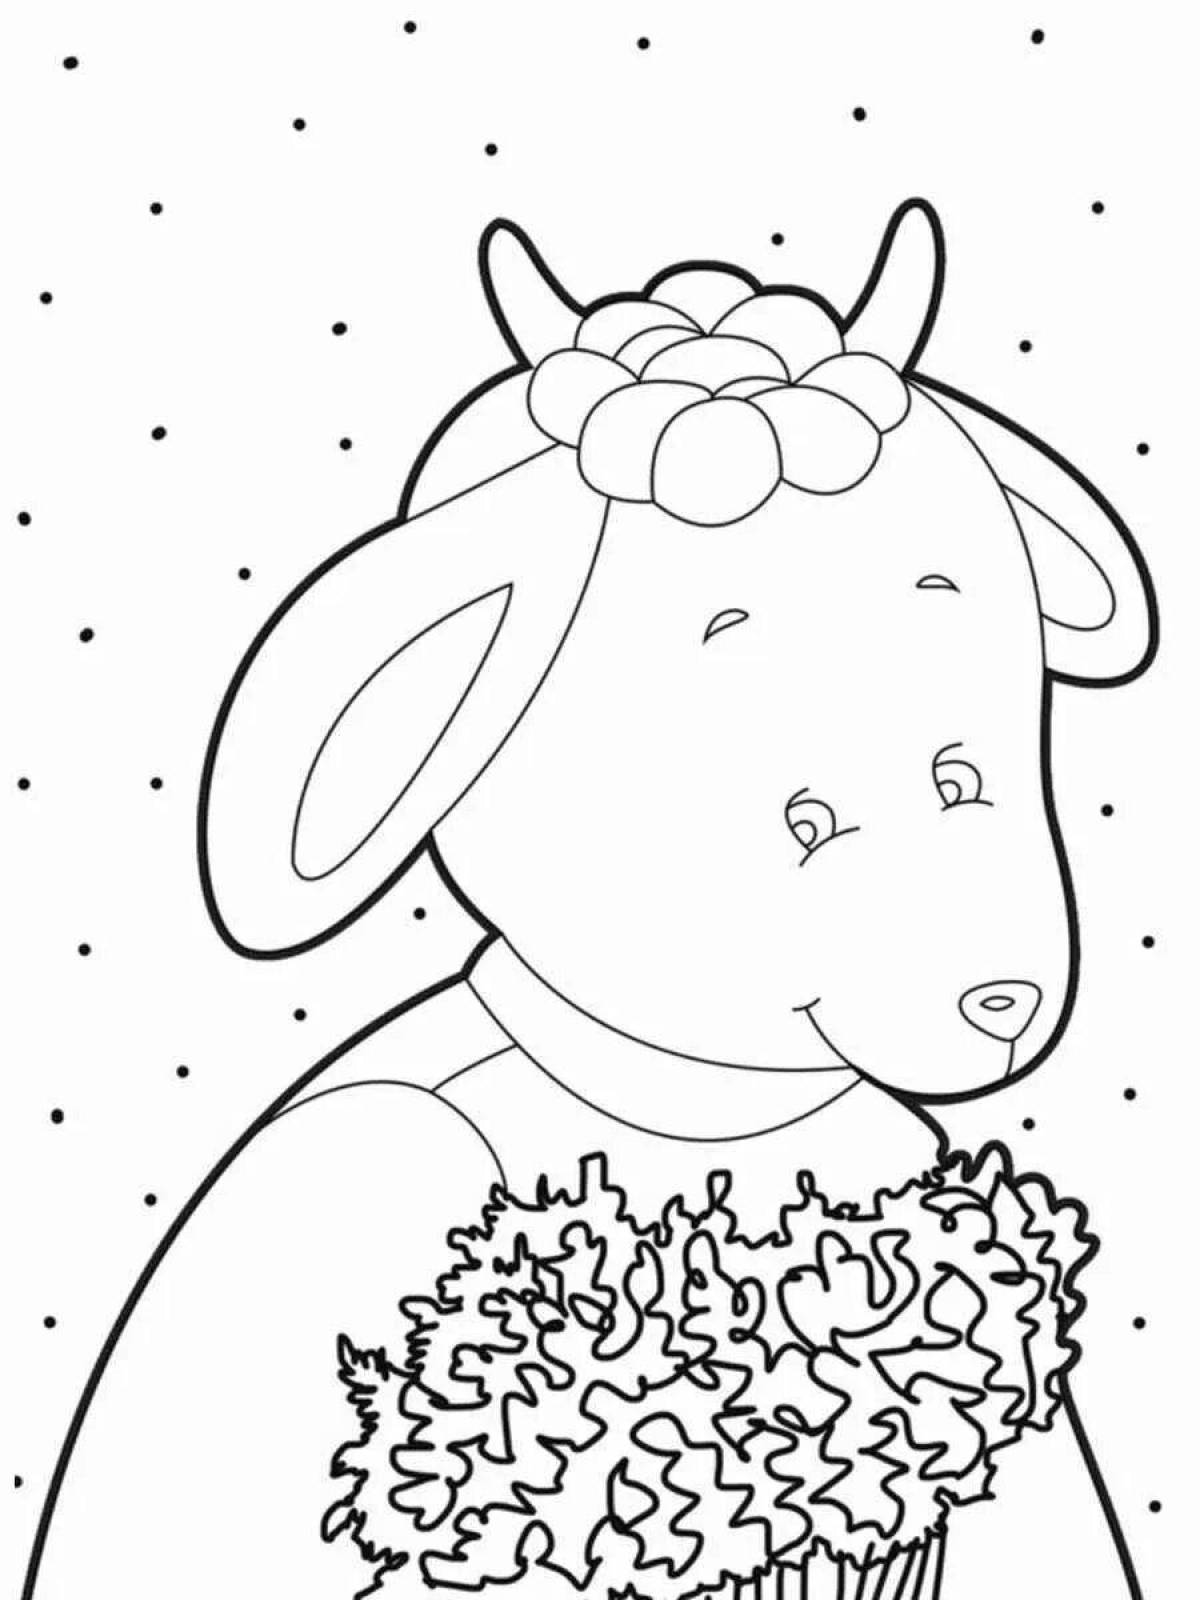 Coloring page festive goat and seven kids